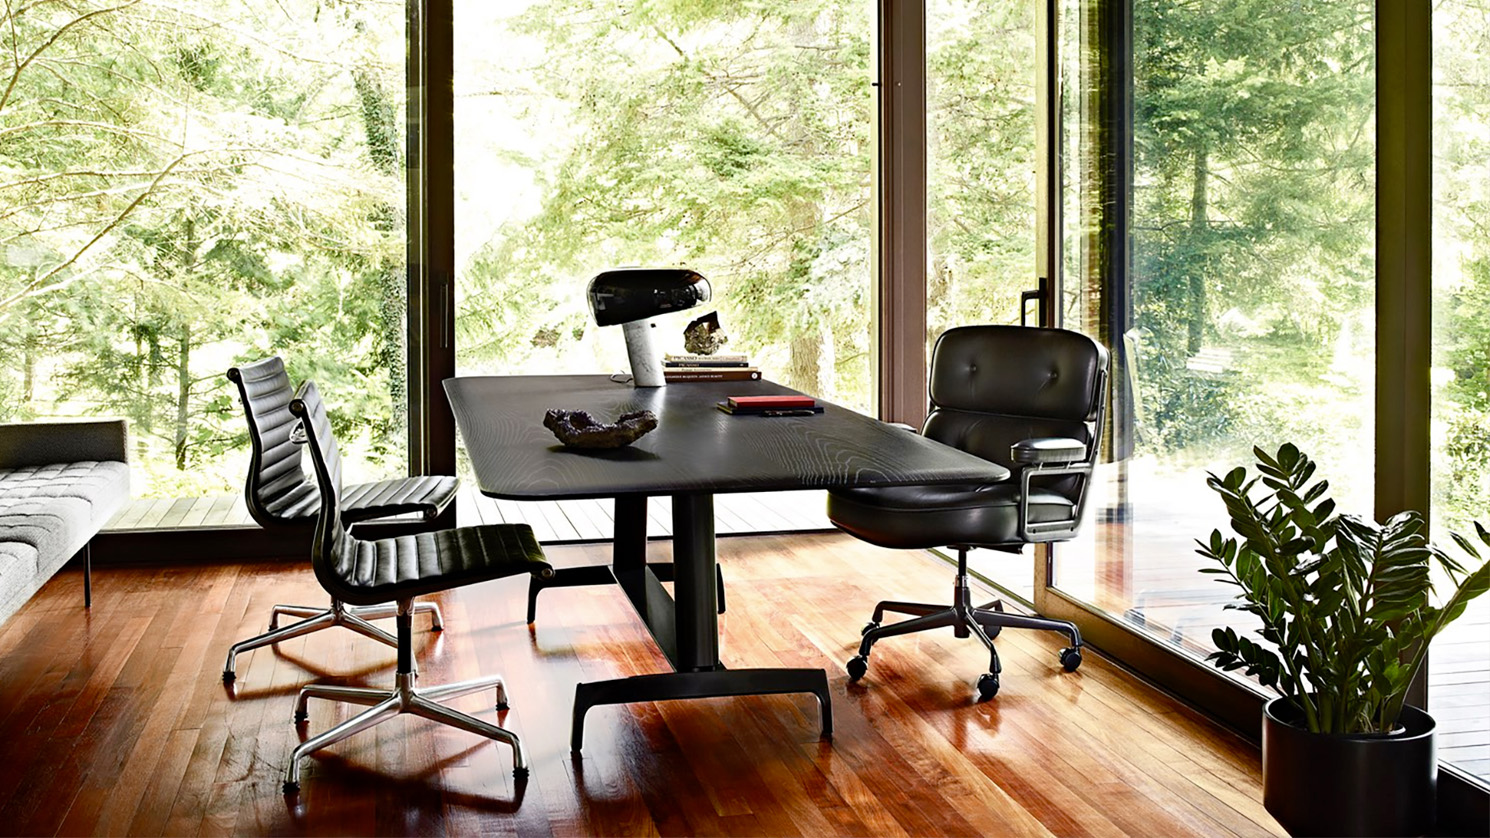 most expensive office chairs